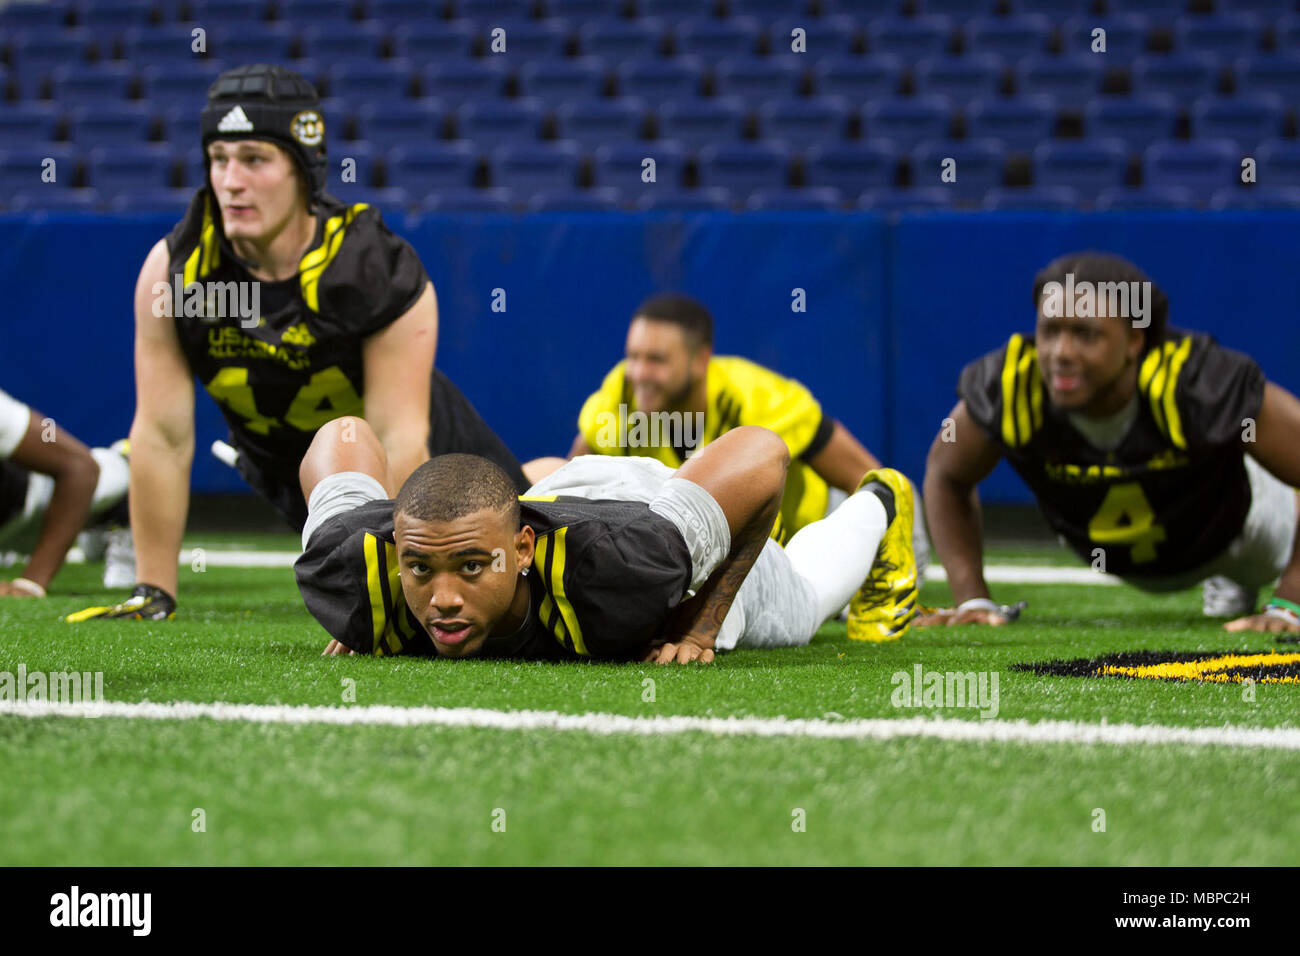 Jaiden Woodbey, a football player from St. John Bosco High School in Fontana, Calif., and the rest of the U.S. Army All-Americans participate in an Army physical training session with members of the U.S. Army prior to playing a friendly 7-on-7 football game in the Alamodome in the week leading up to the U.S. Army All-American Bowl, Jan. 2, 2017 in San Antonio, Texas. During Bowl week, players and band members are paired with Army Soldier Mentors, outstanding Soldiers who have earned distinctions from their commands. The Soldier Mentors attend practices and events throughout the week, which off Stock Photo